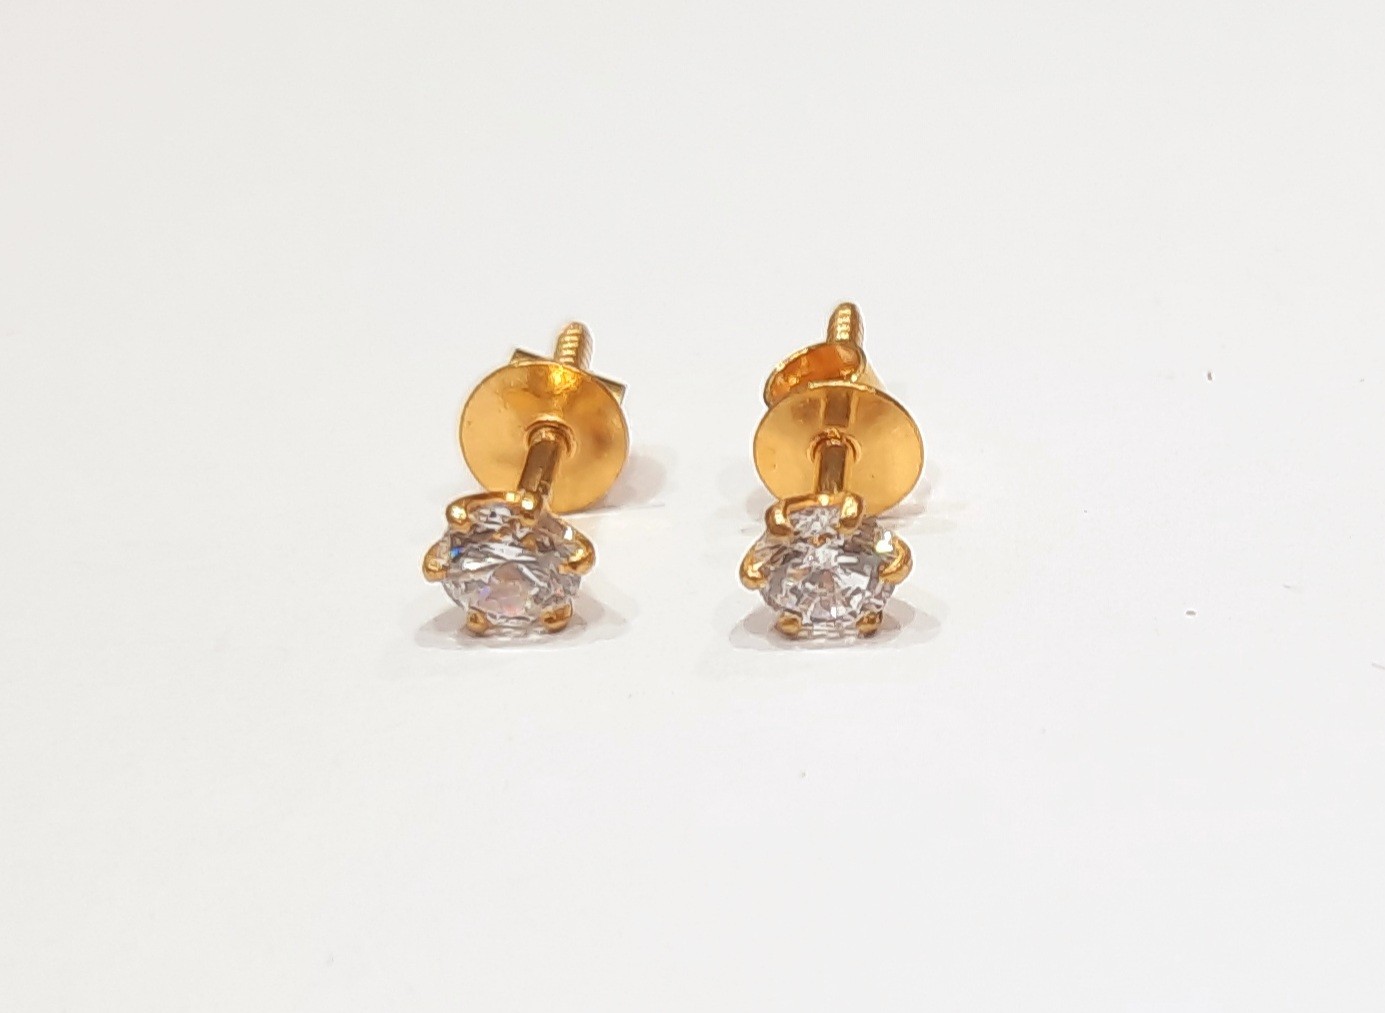 Details more than 254 single gold earring latest